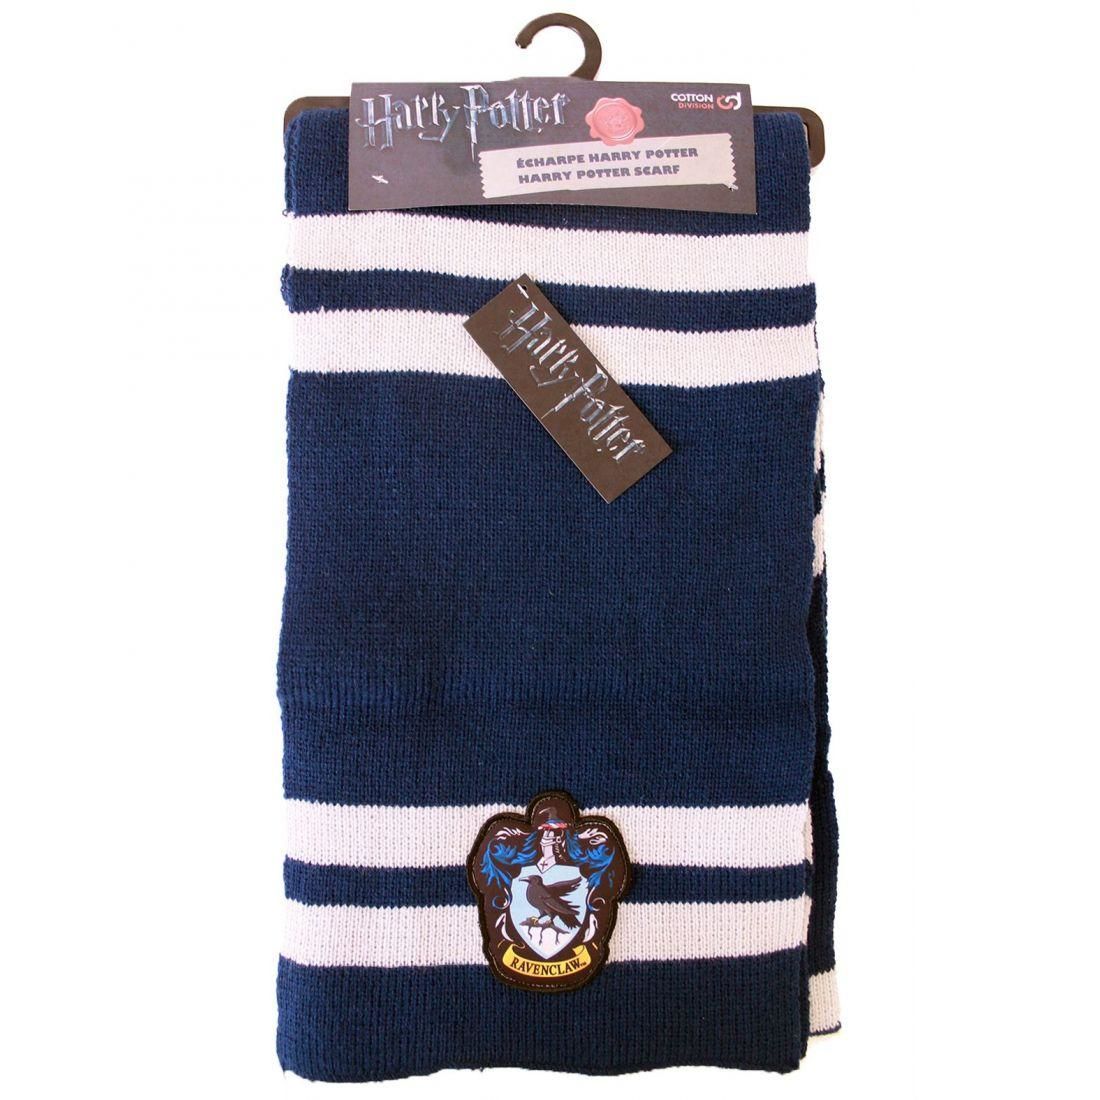 Harry Potter - Ravenclaw House School Scarf